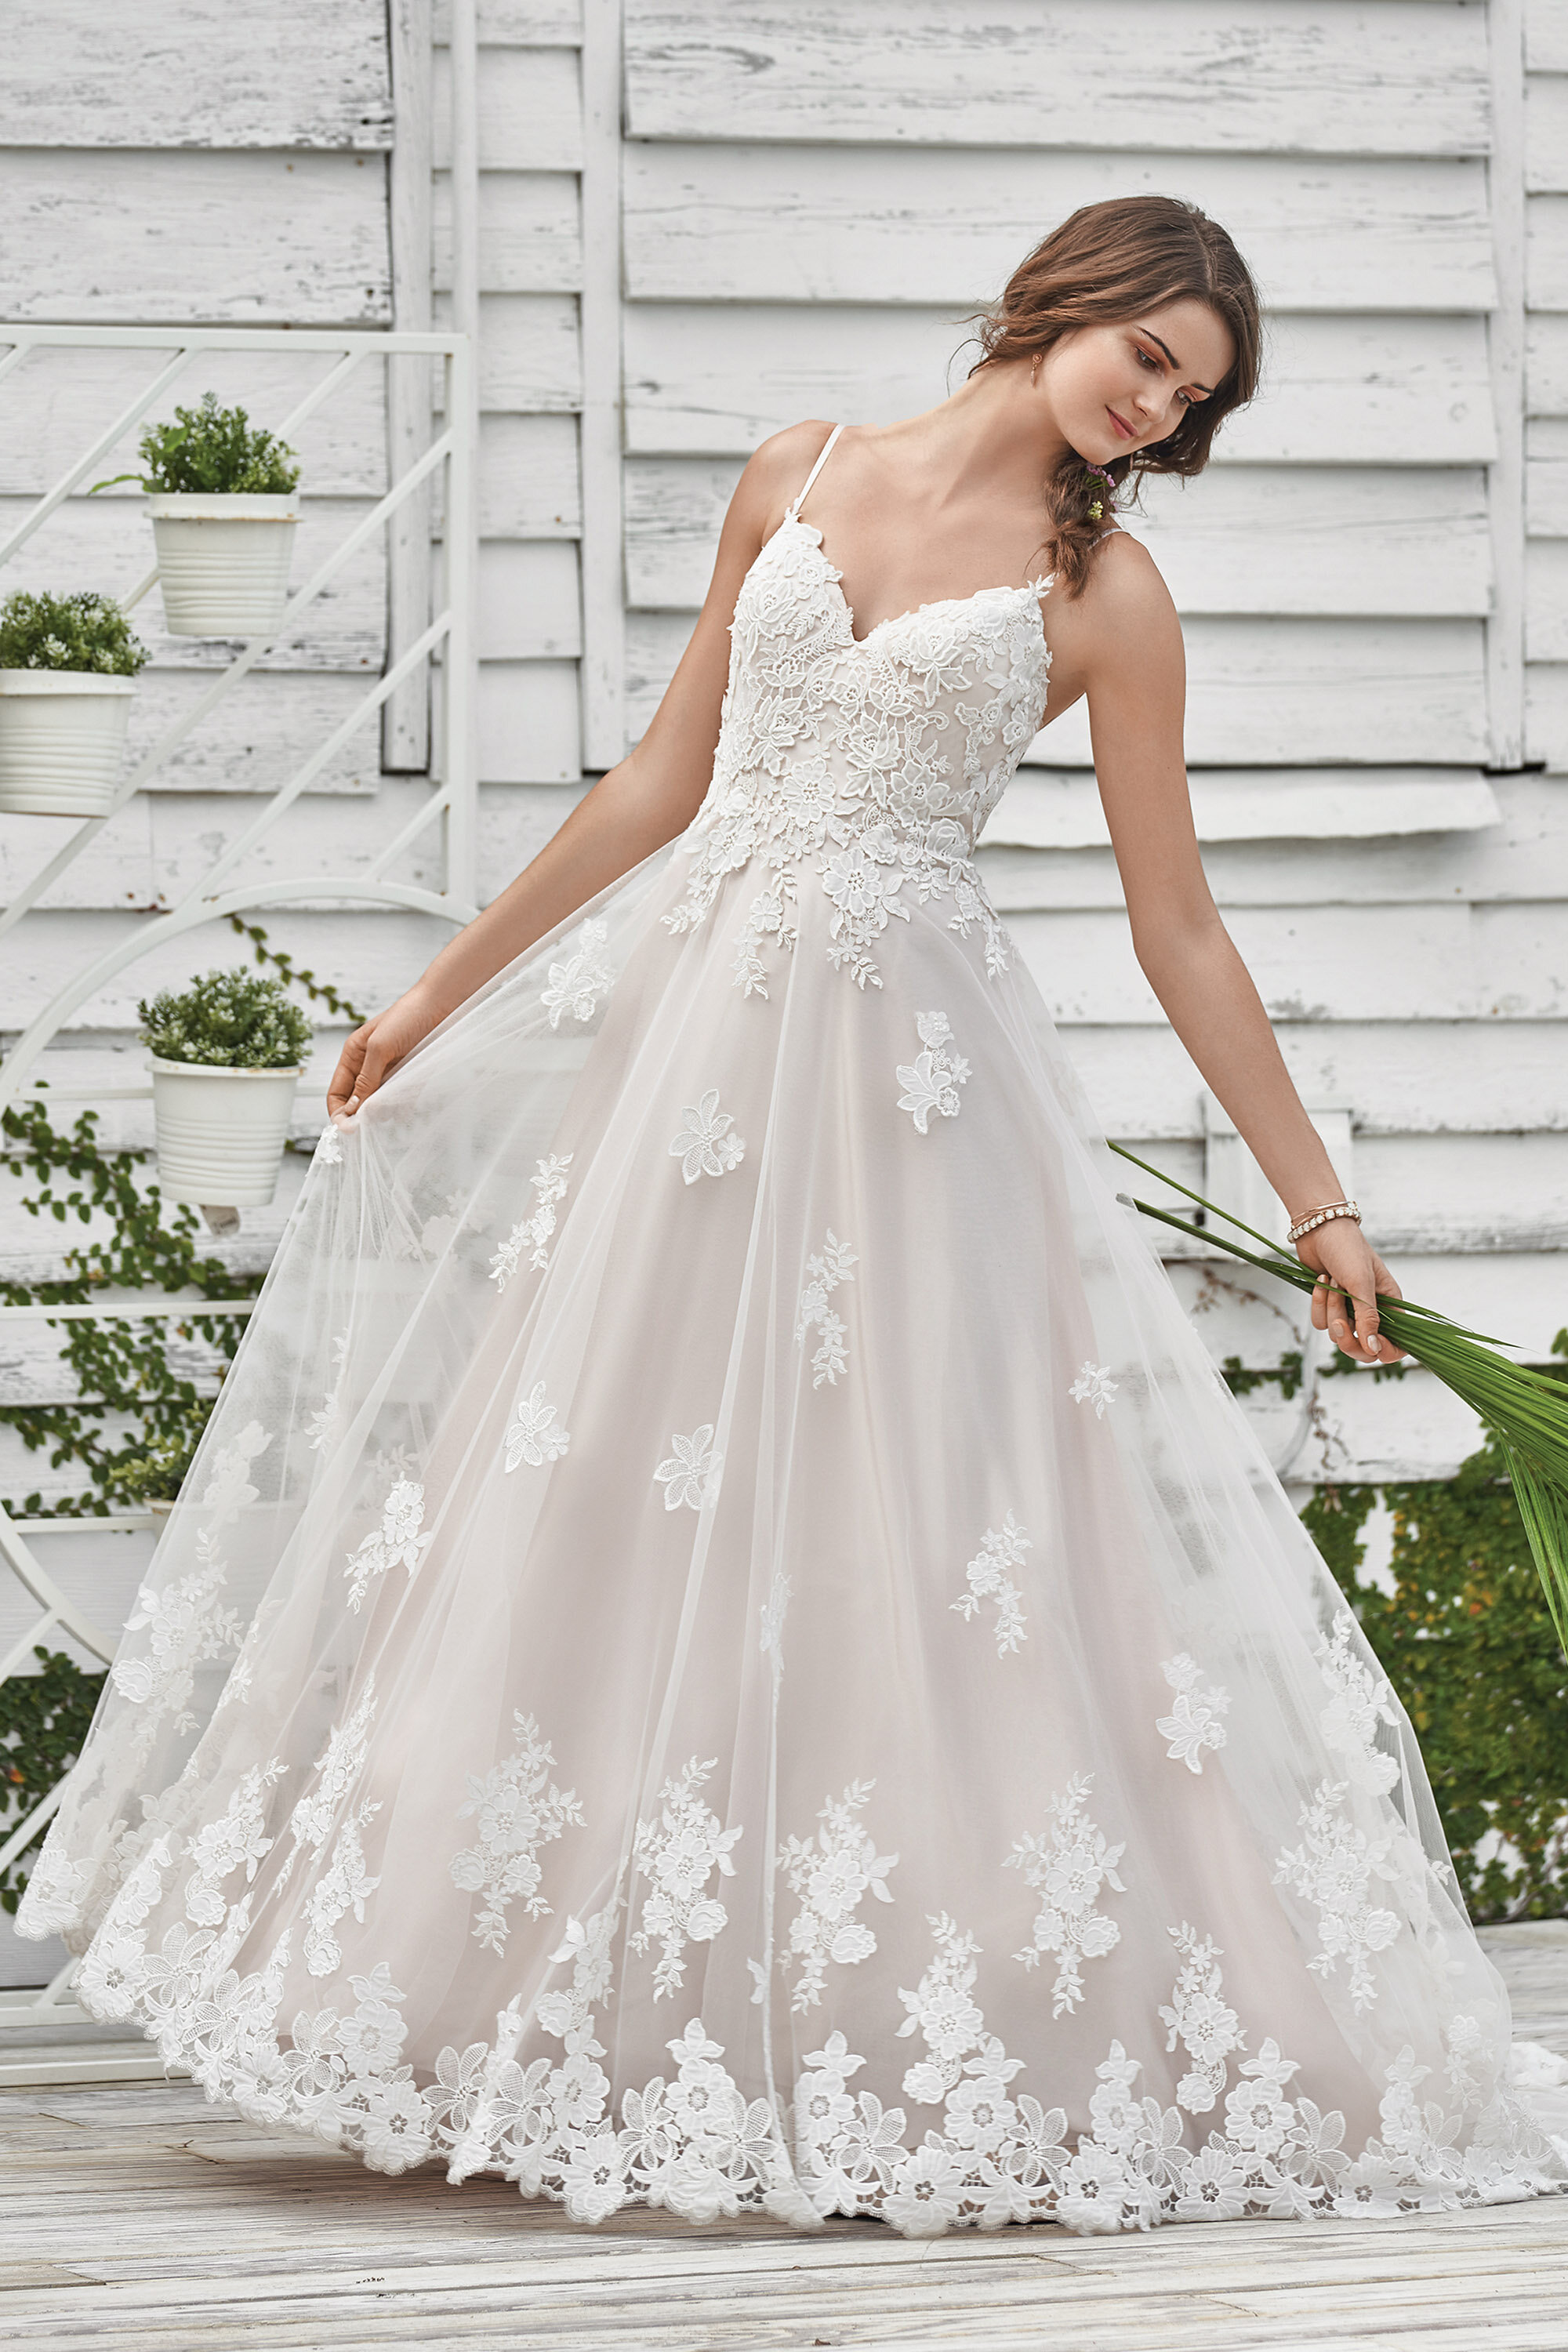 How Long Before my Wedding Should I get My Dress Altered? — Uptown Bride